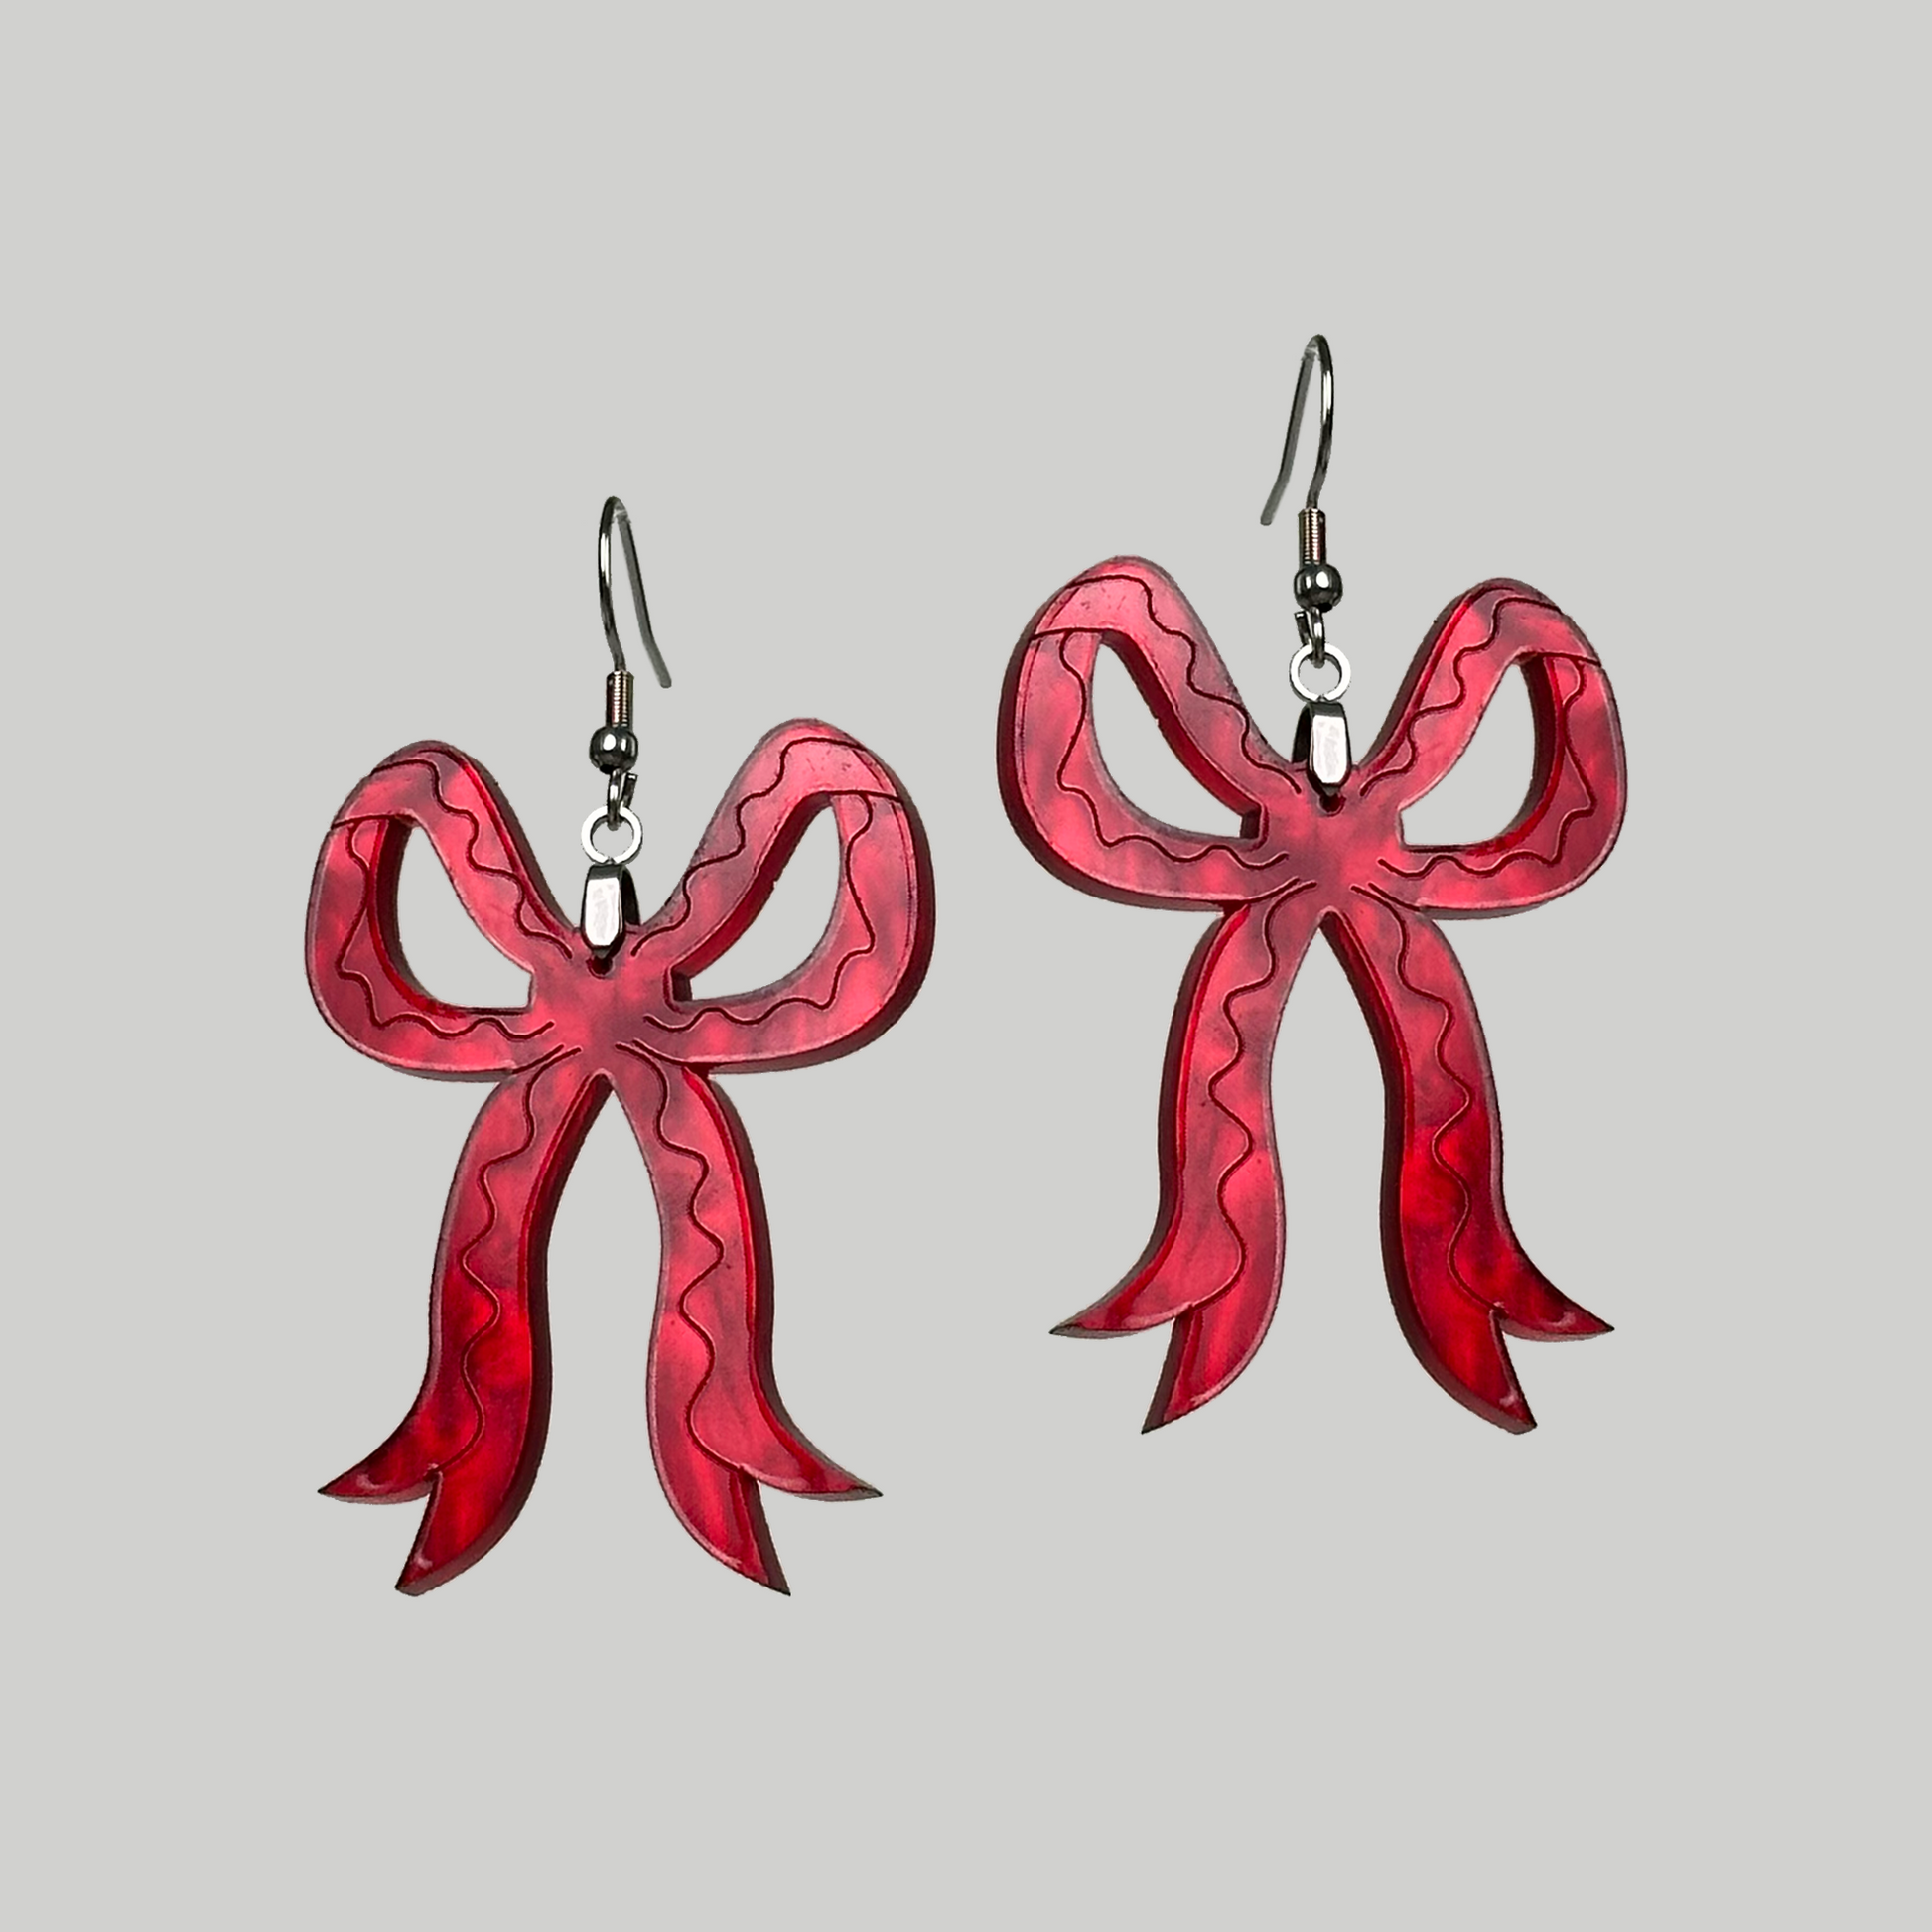 Red Bow Earrings: Chic and playful, these earrings feature stylish red bows for a touch of festive and fashionable charm.